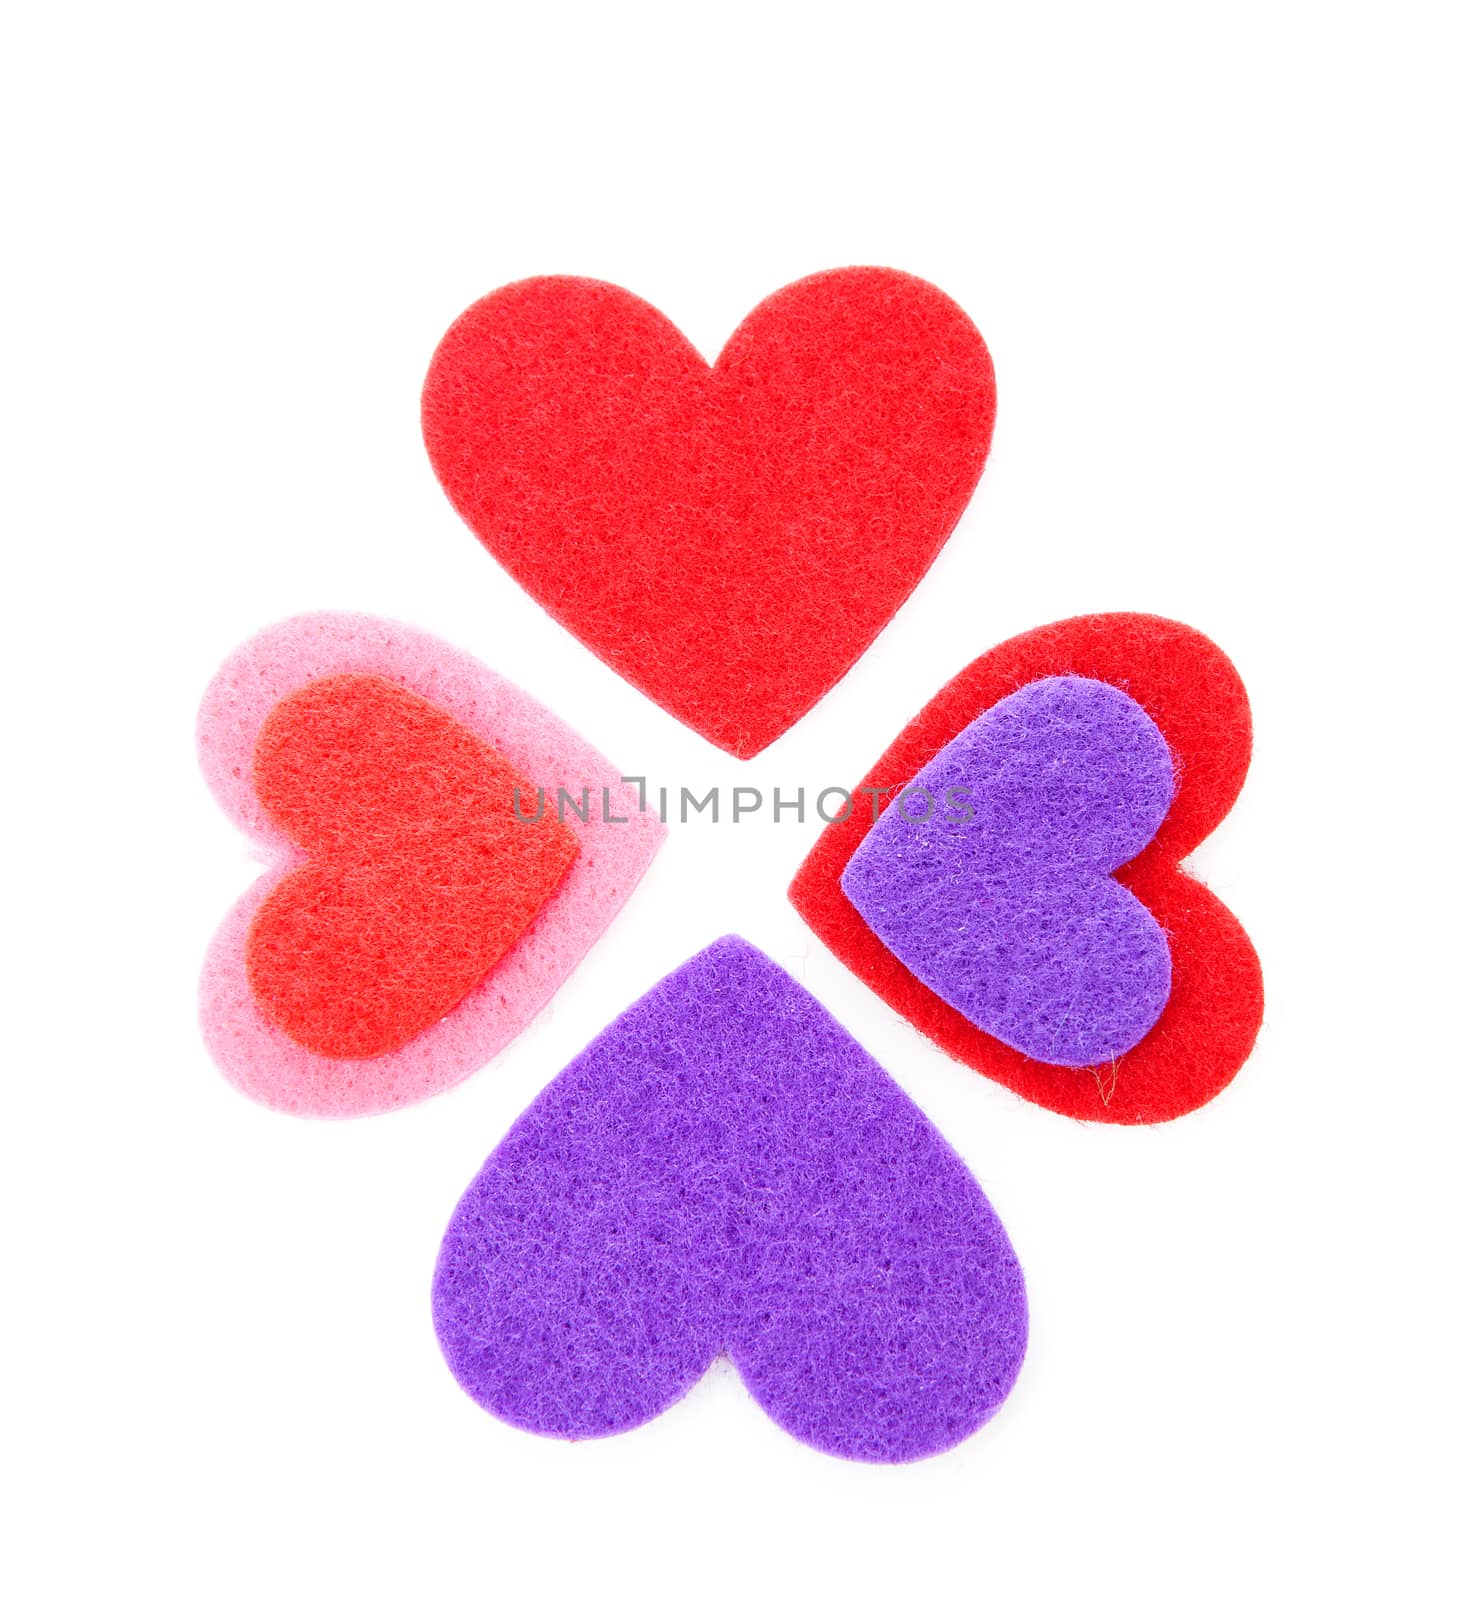 Four hearts made of felt over white background